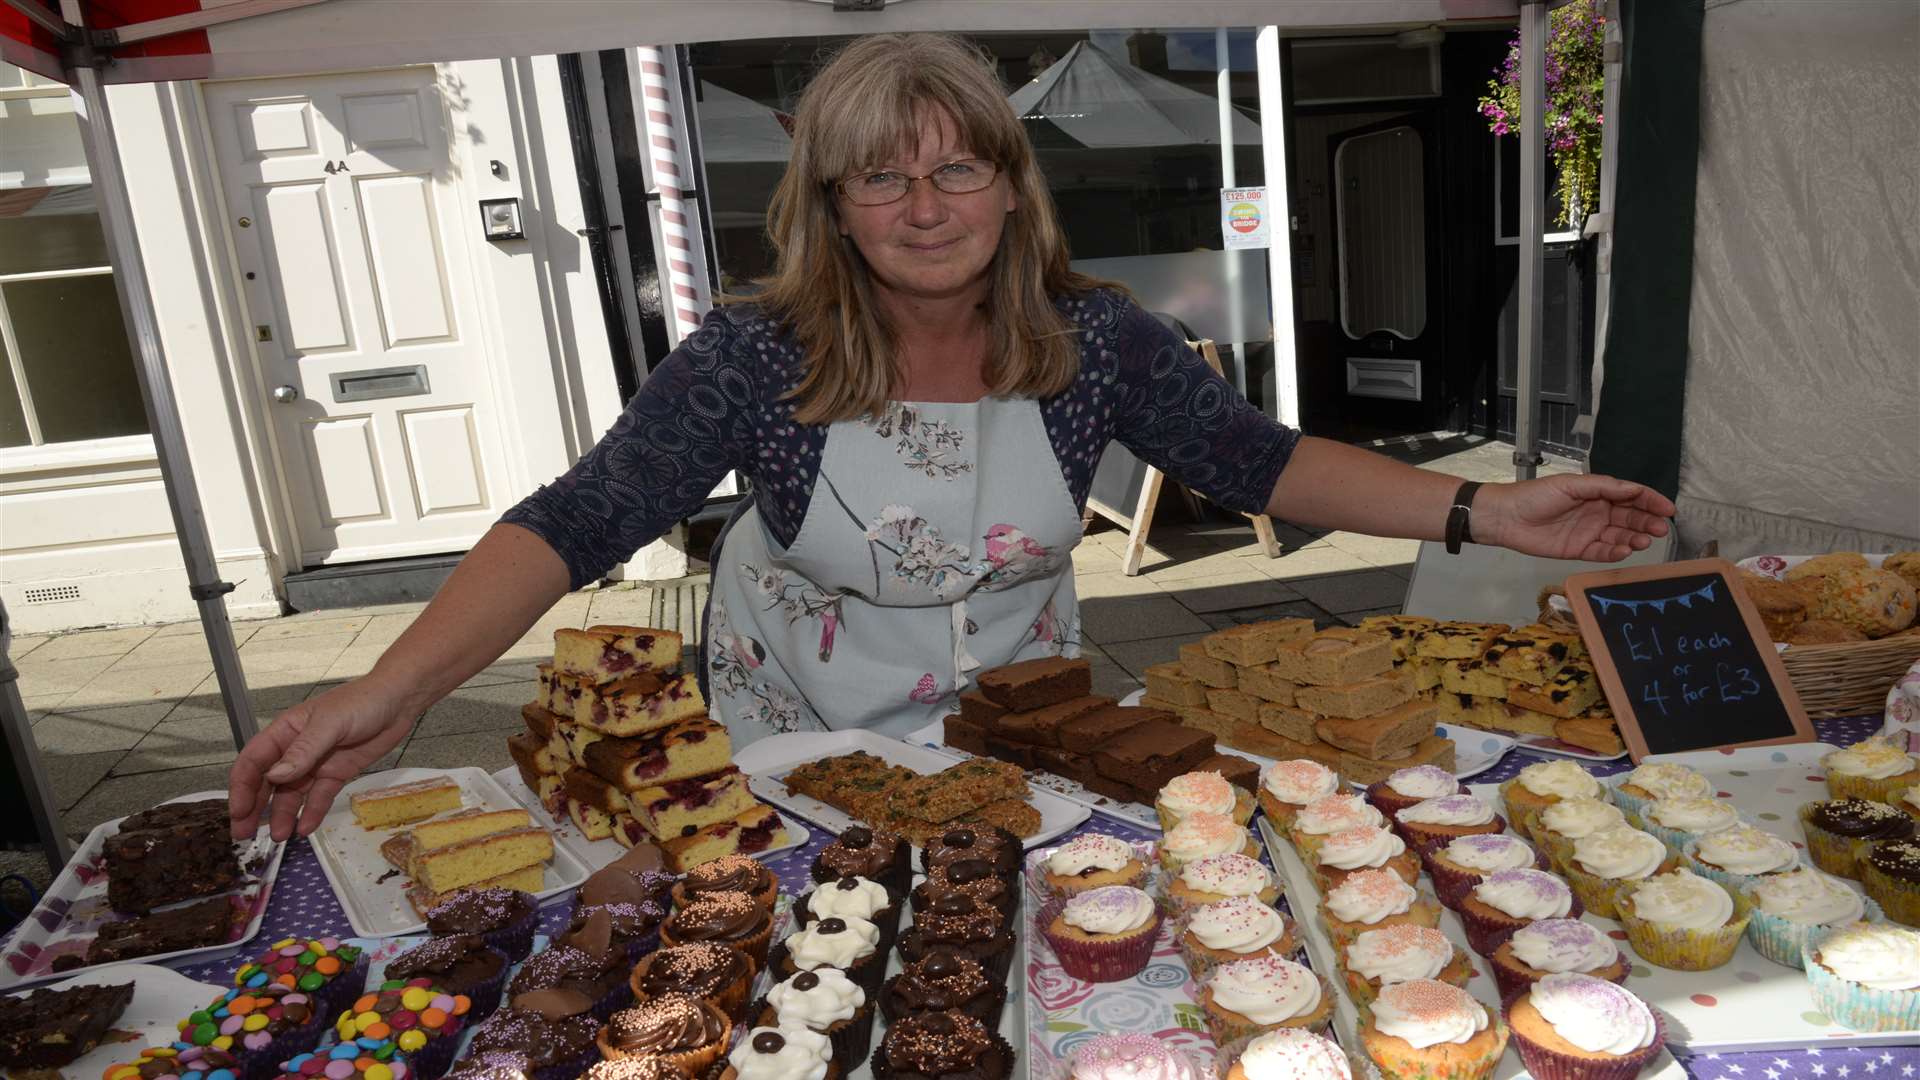 The Best of Faversham traders and food stalls will join the traditional Charter Market